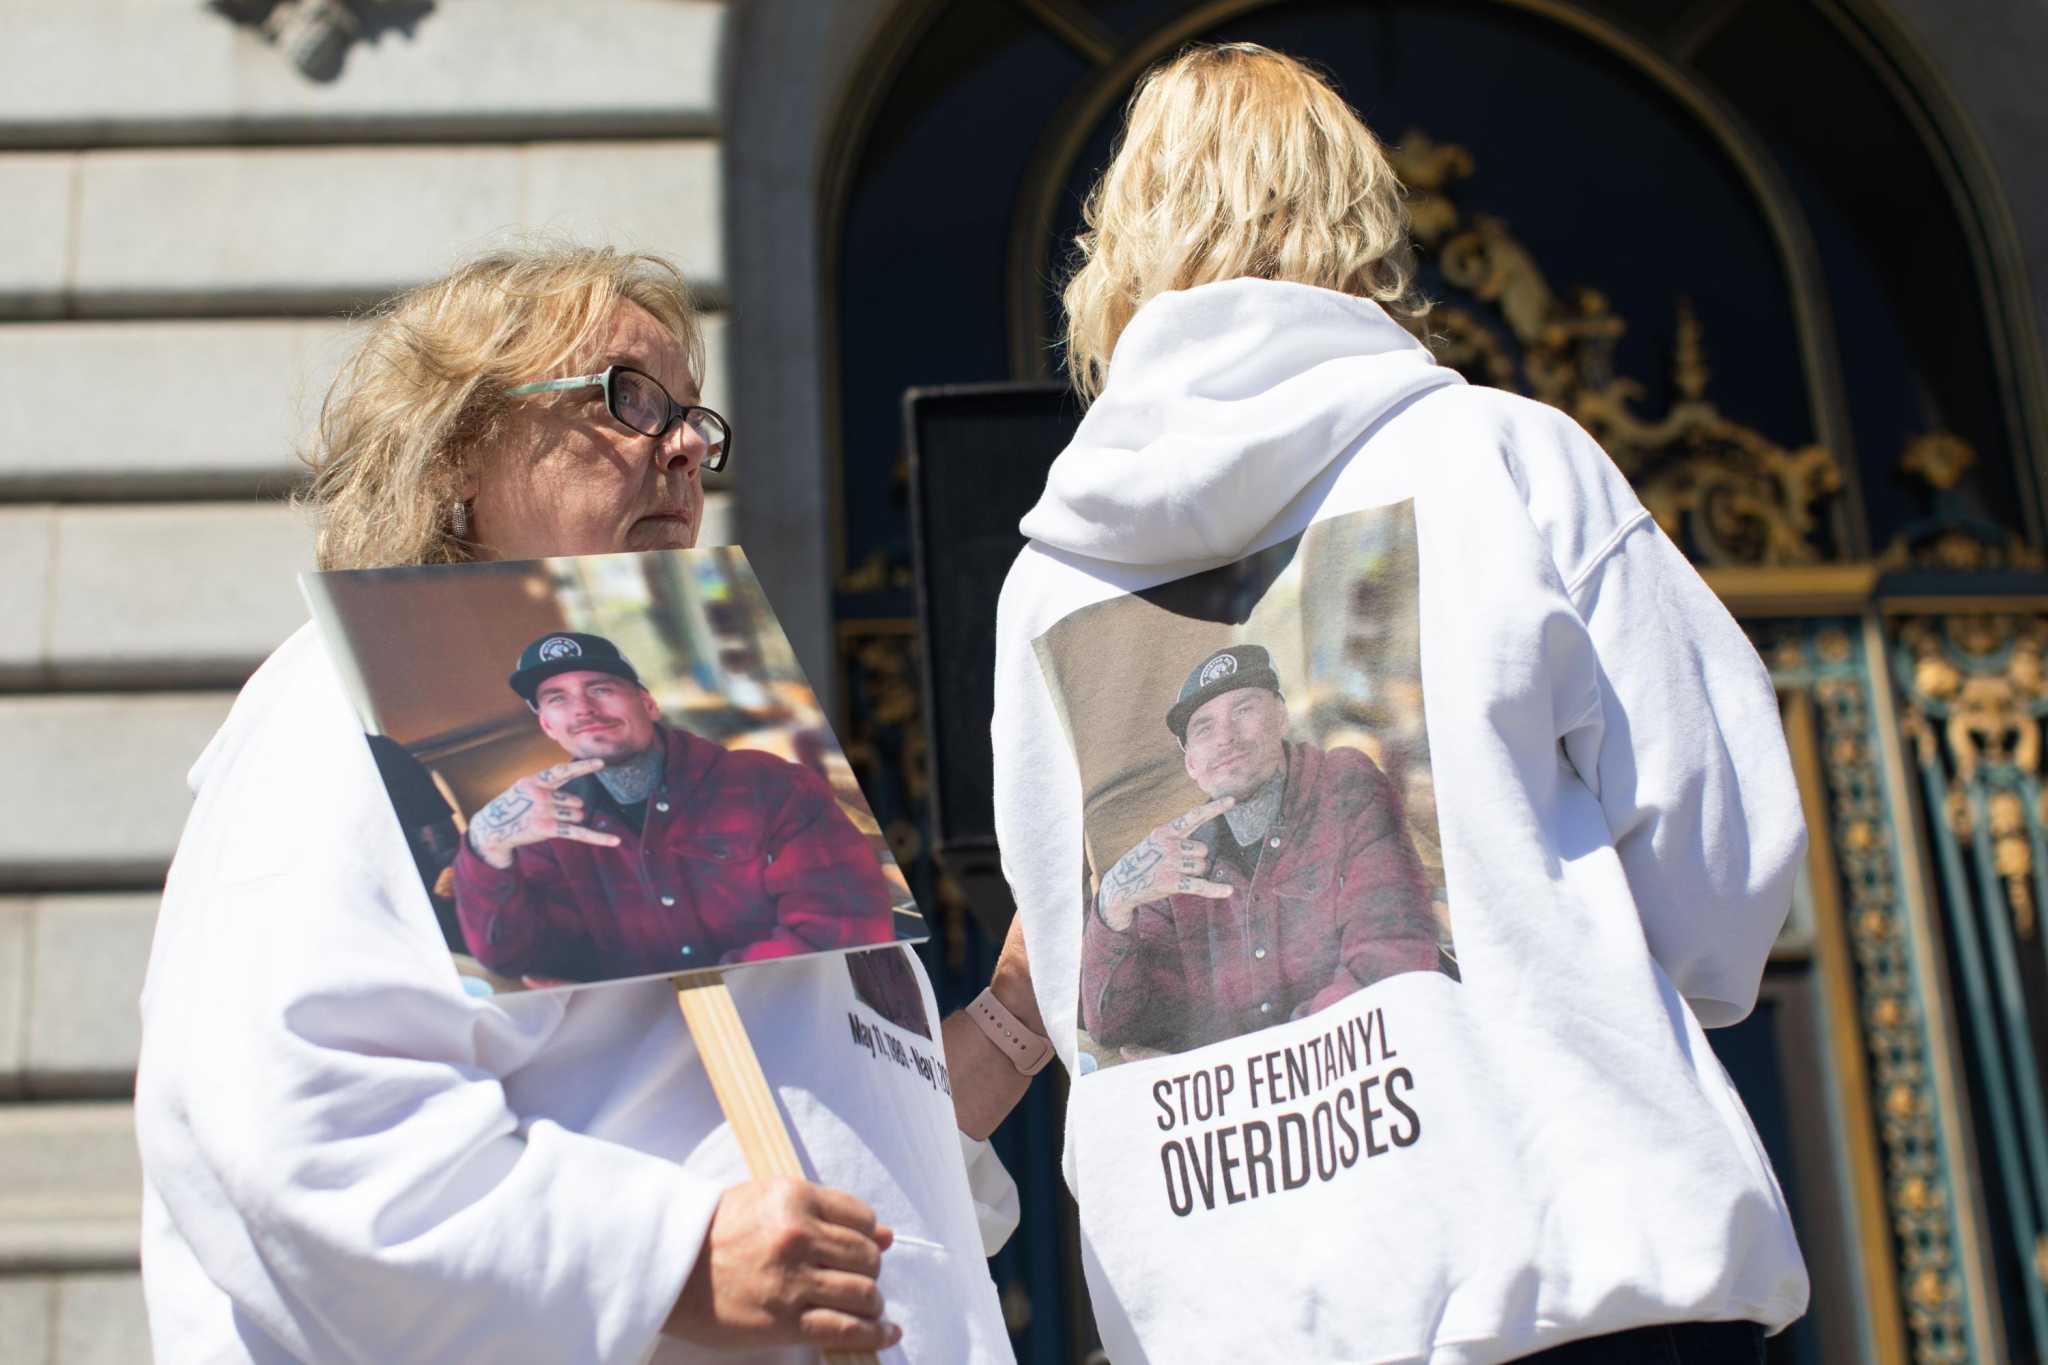 Mothers rally to stop the fentanyl deaths of their children